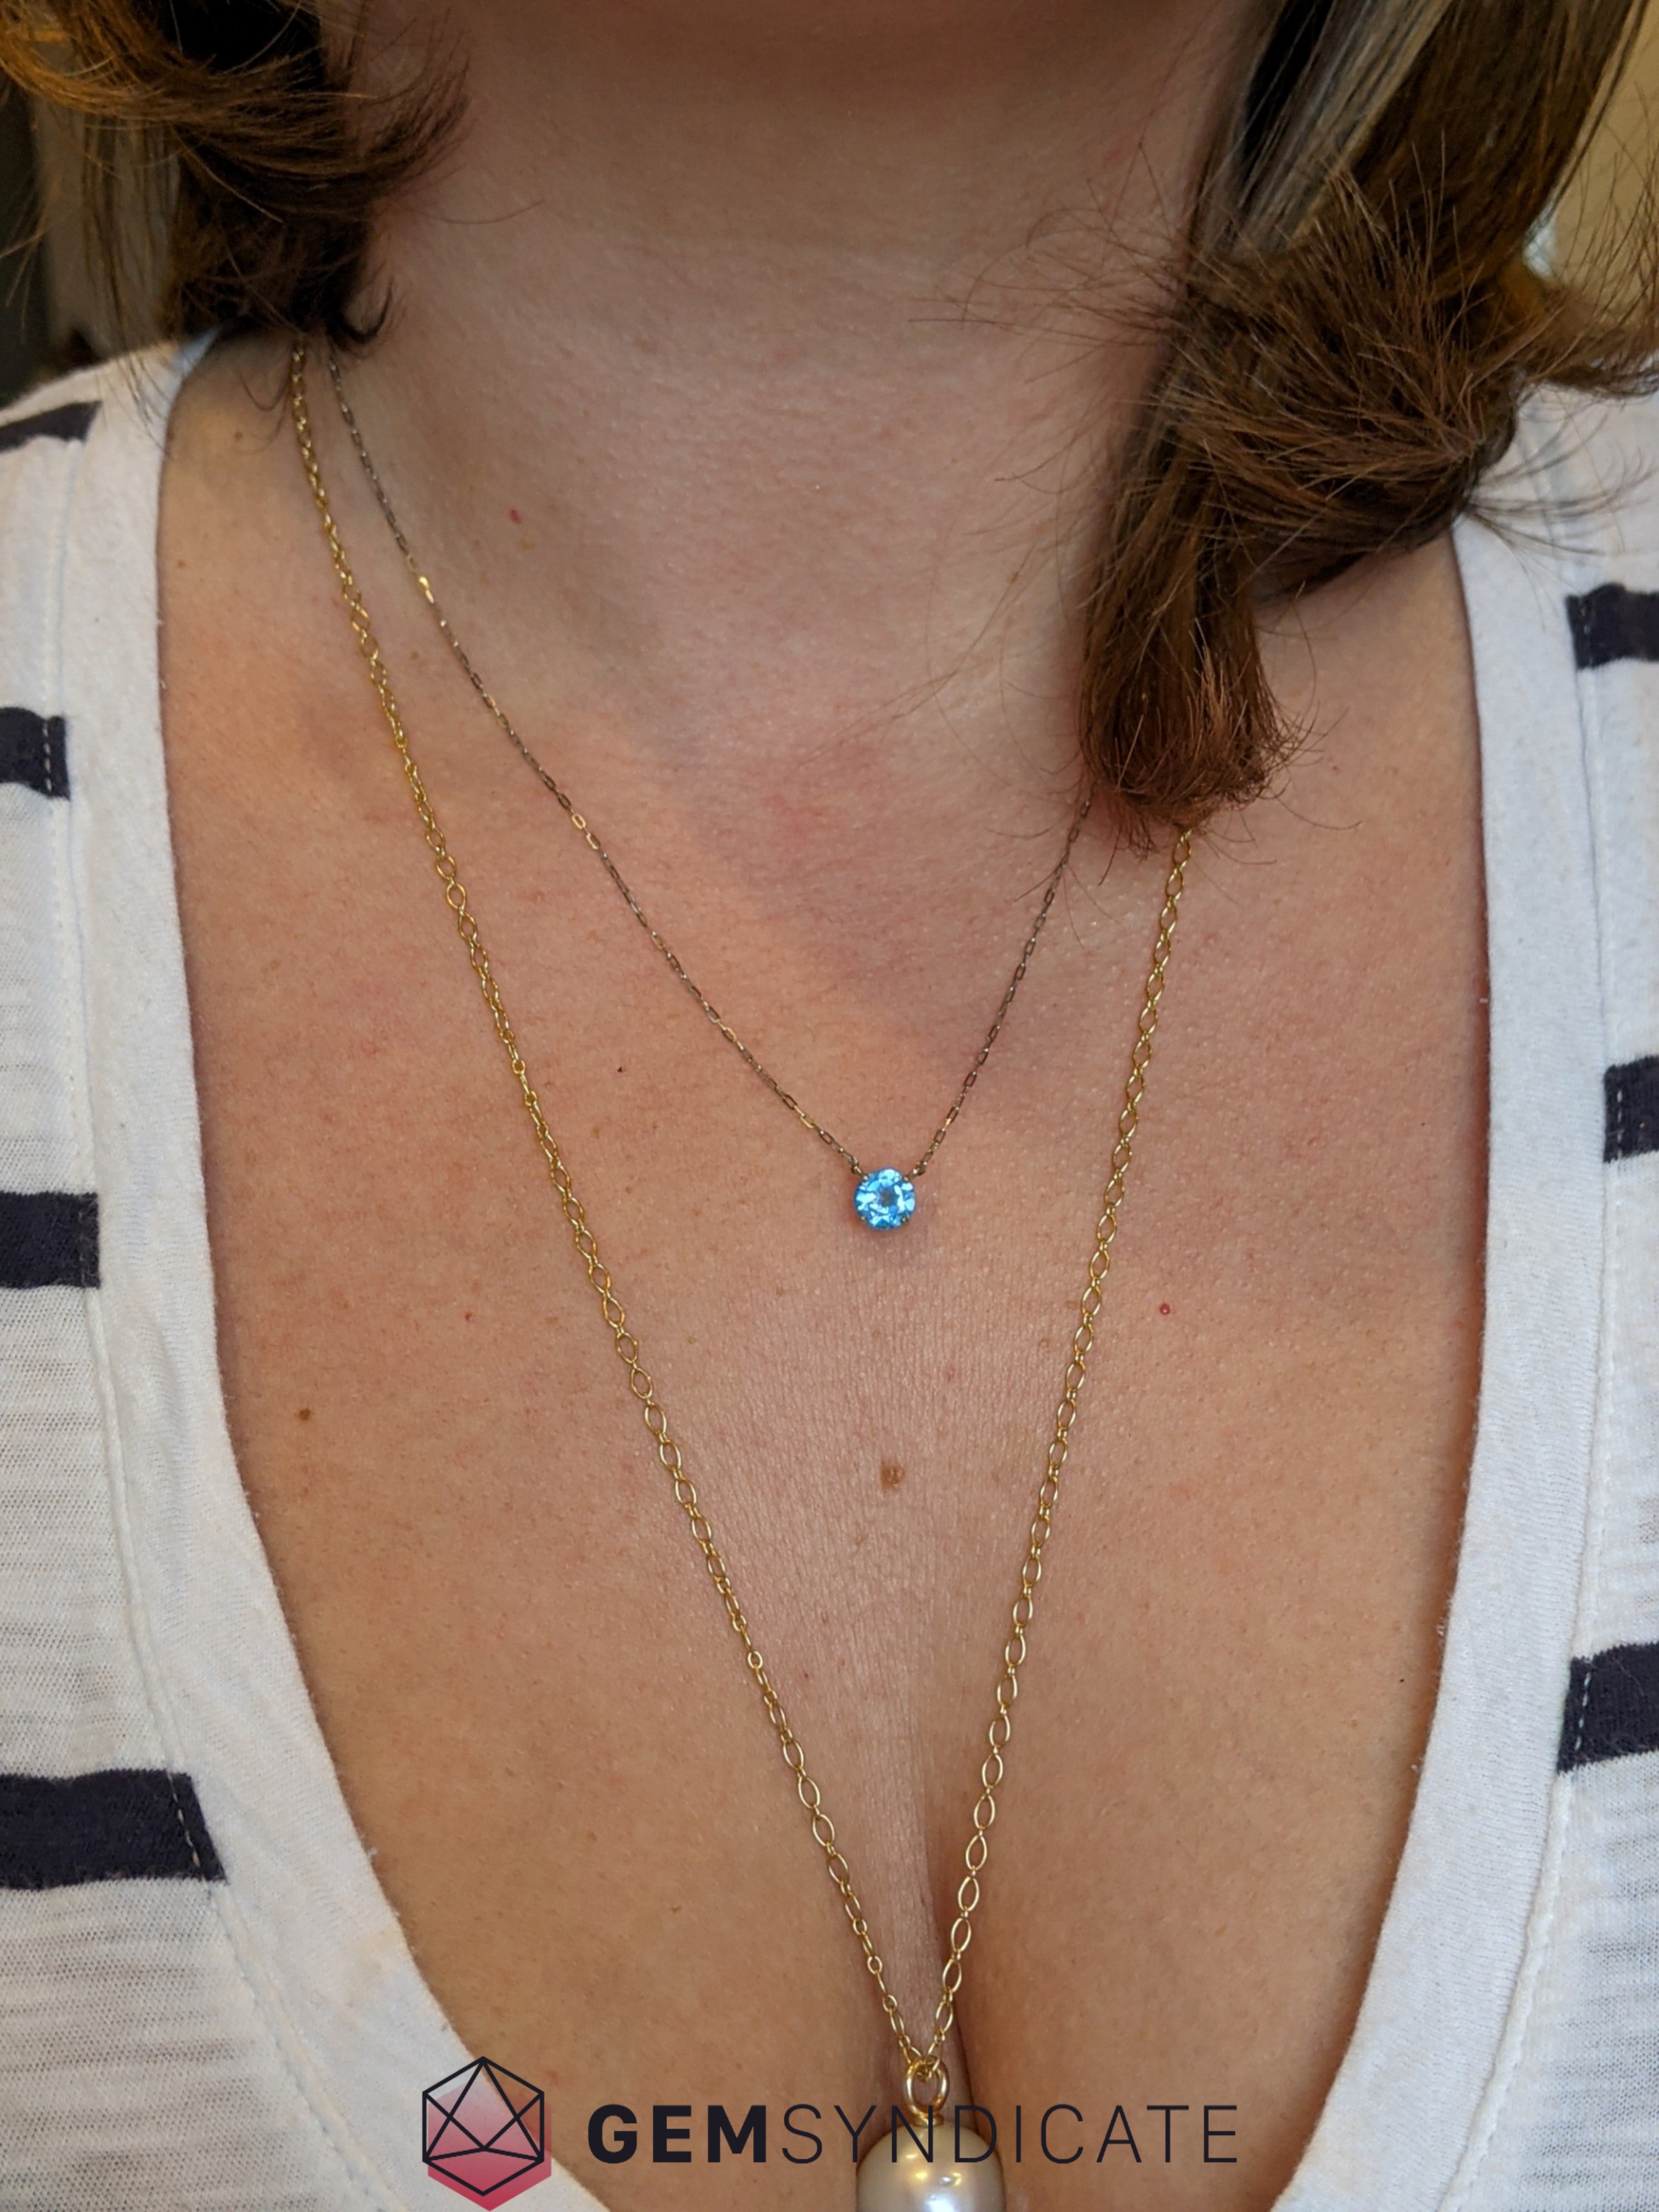 Magnificent Blue Topaz Solitaire Necklace in 14k White Gold